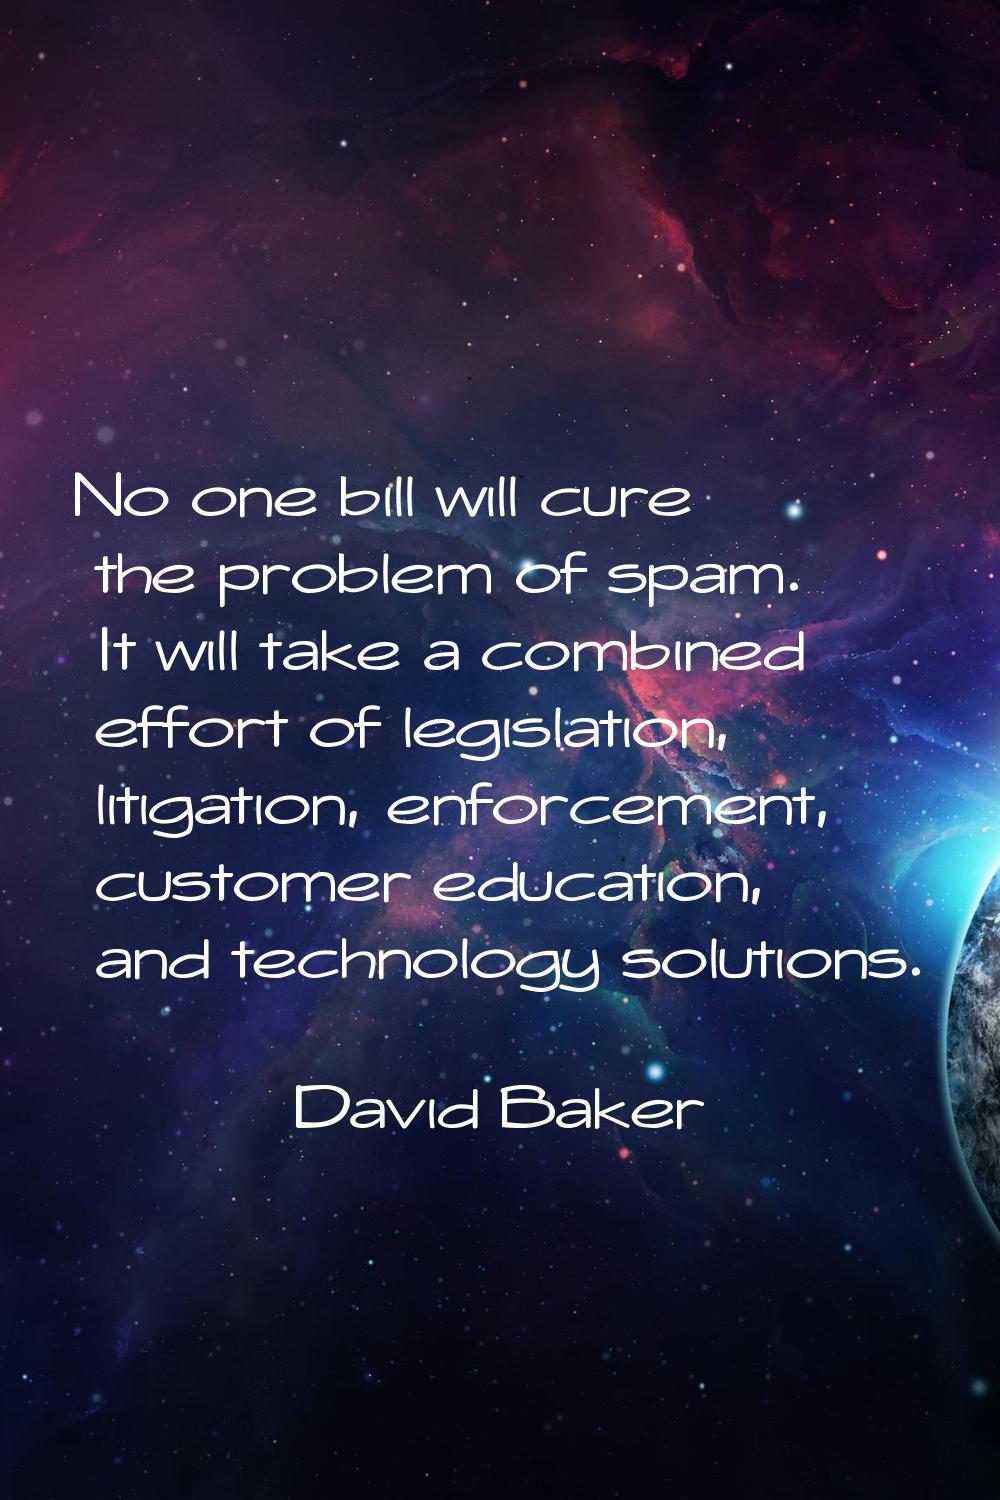 No one bill will cure the problem of spam. It will take a combined effort of legislation, litigatio